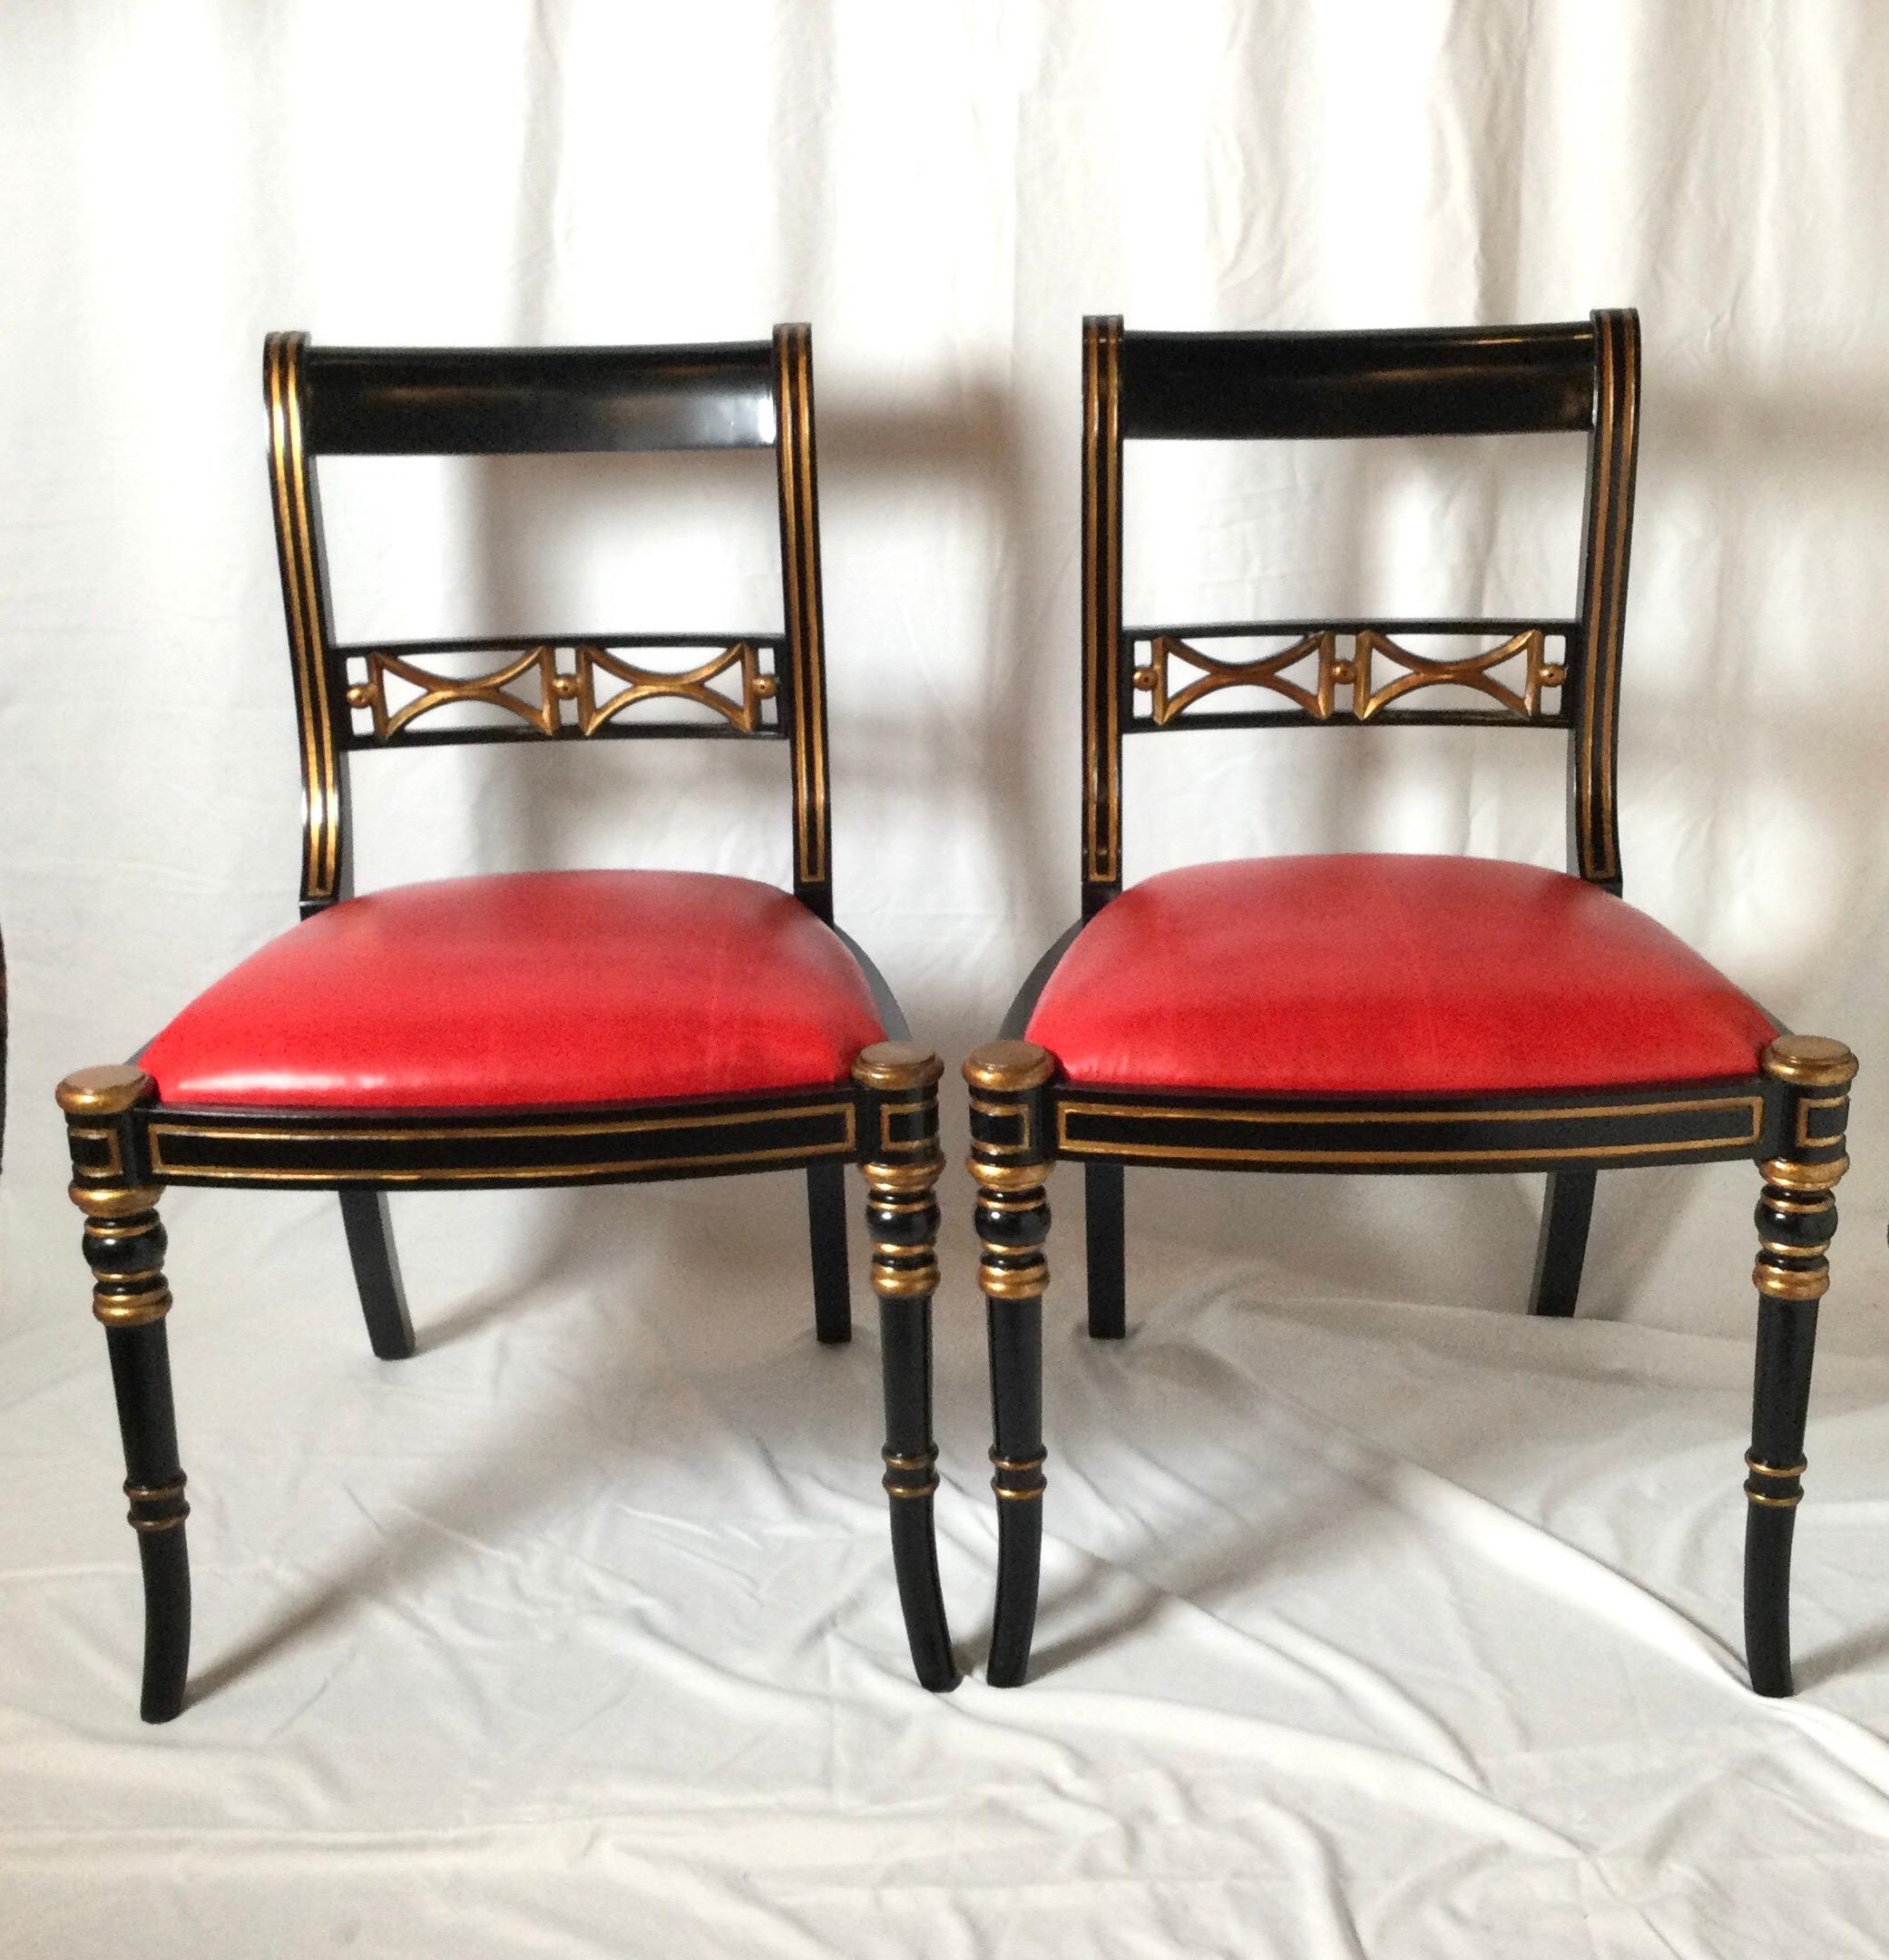 A pair of black and gilt Regency style side chairs with new red leather seats. Elegant frames with gold highlighted details.